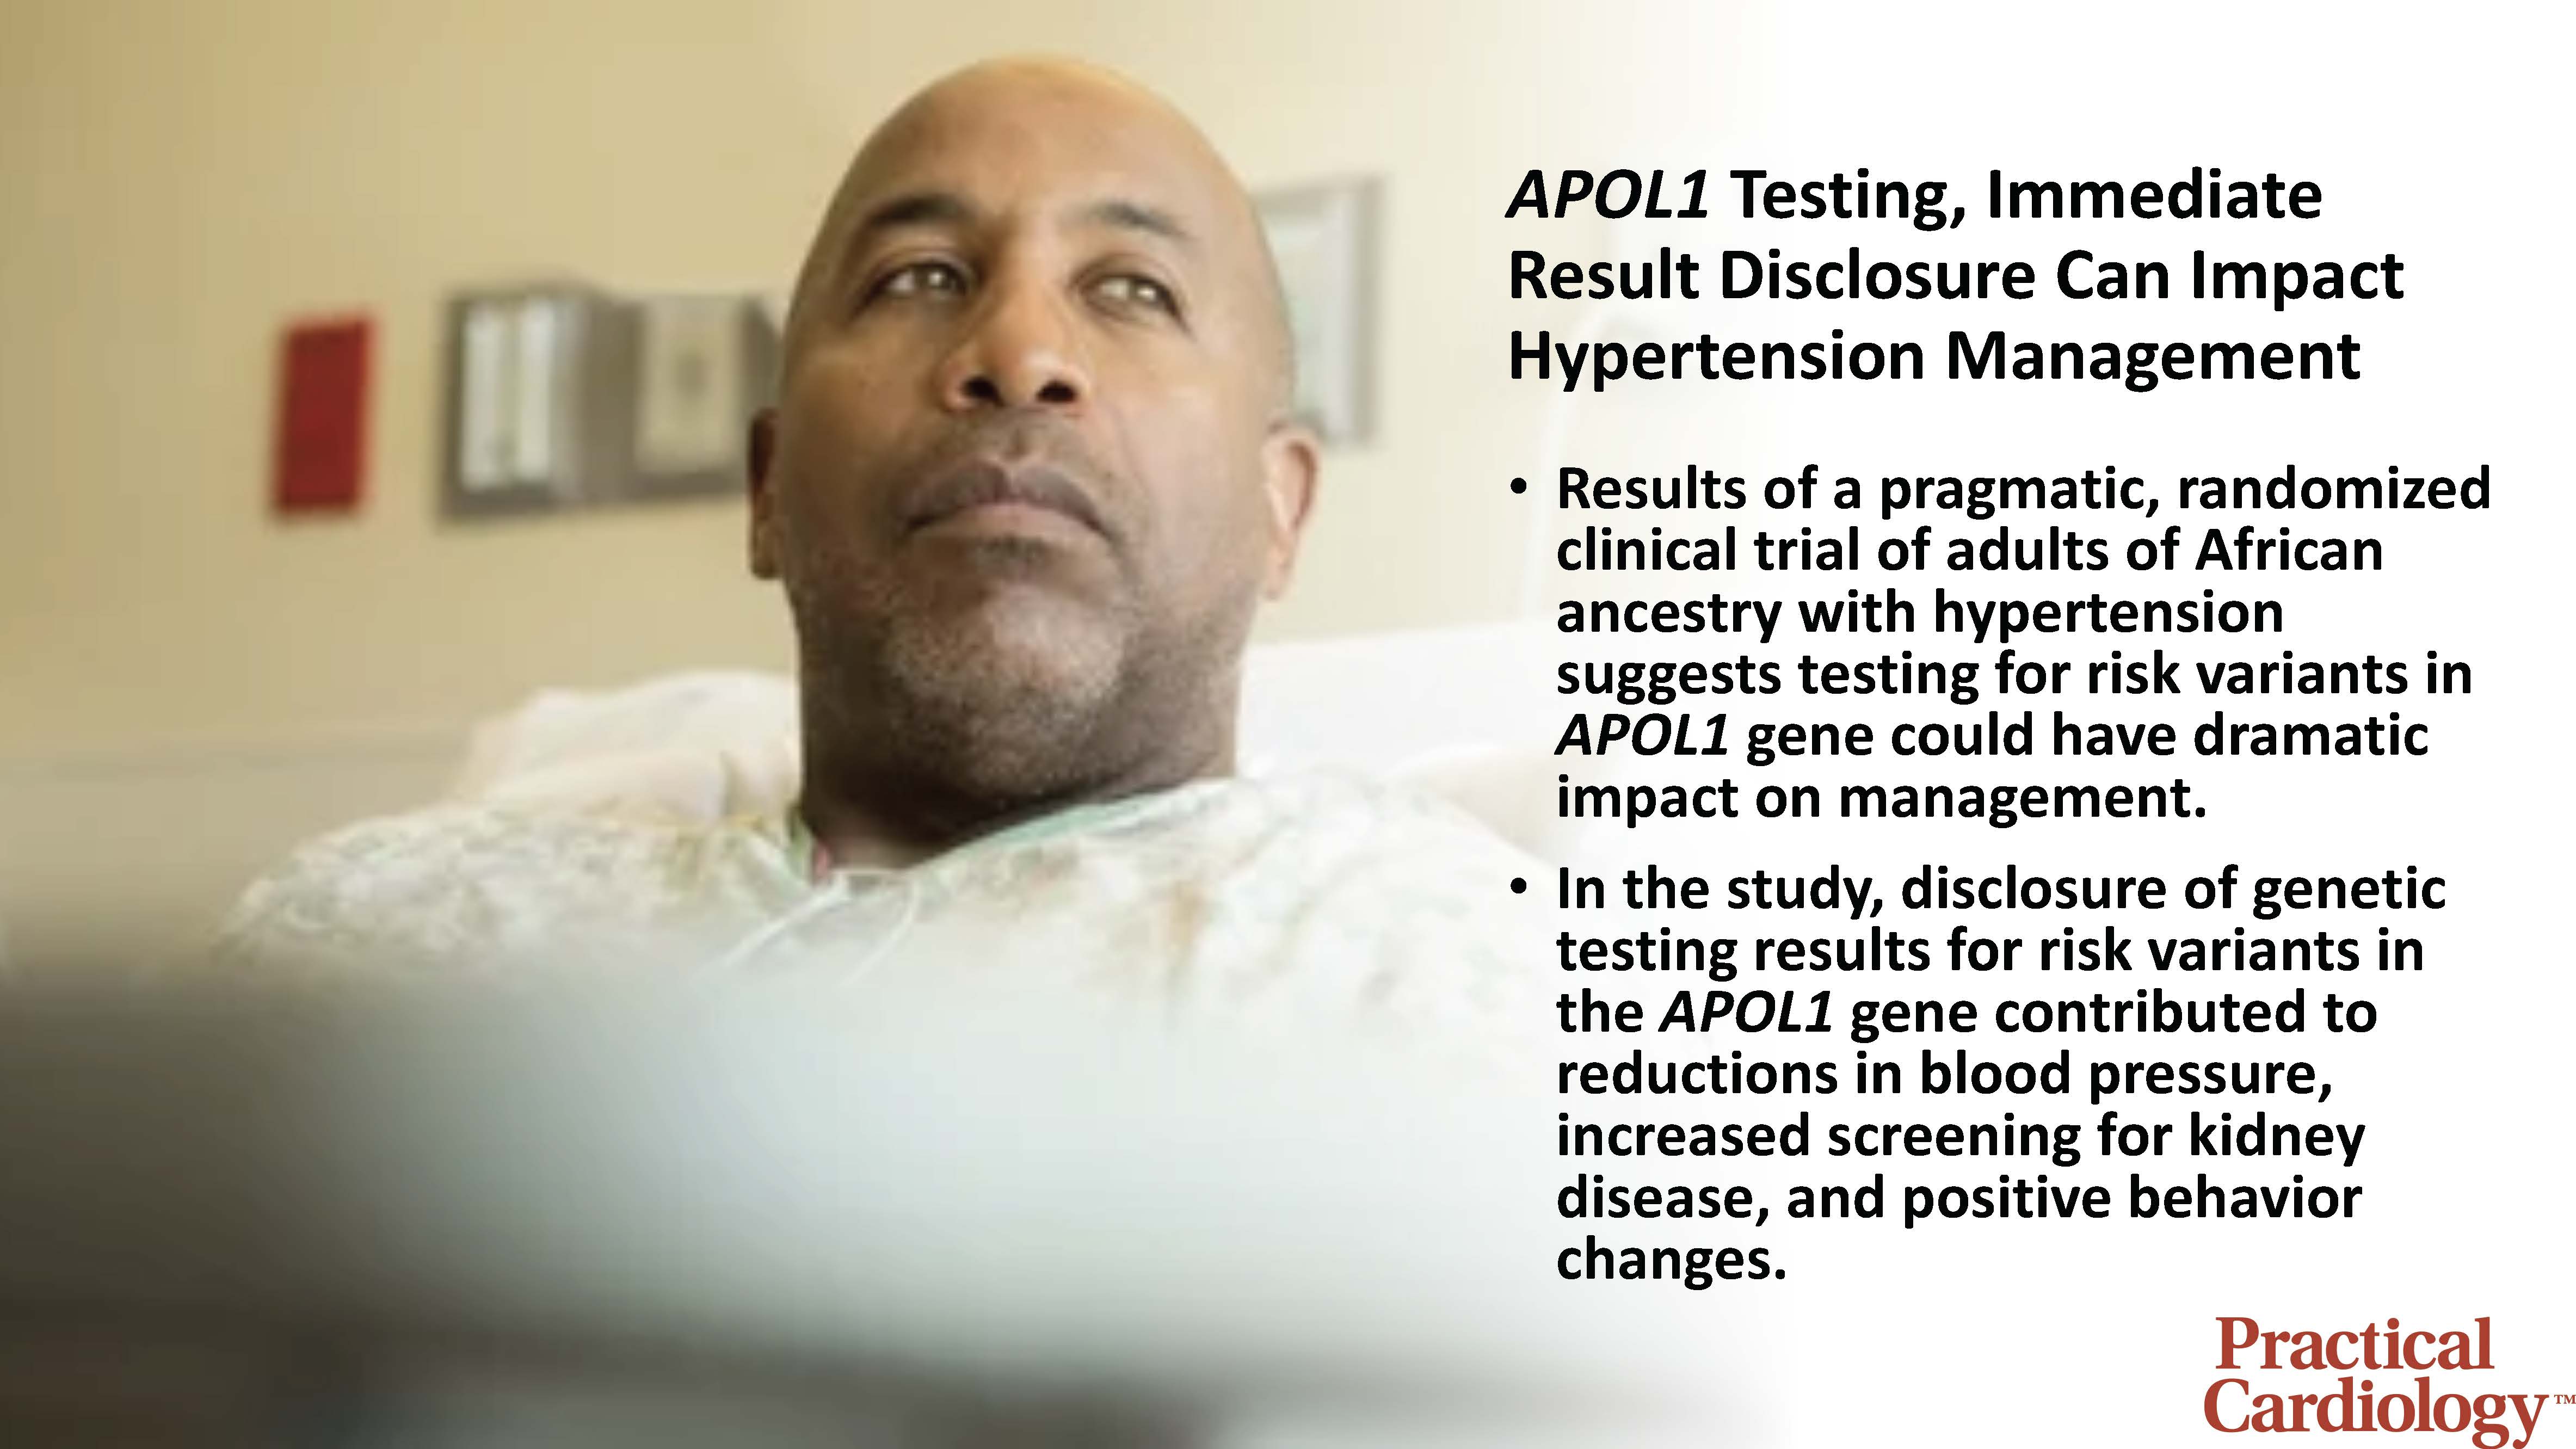 APOL1 testing trial shows benefit of testing and results disclosure.